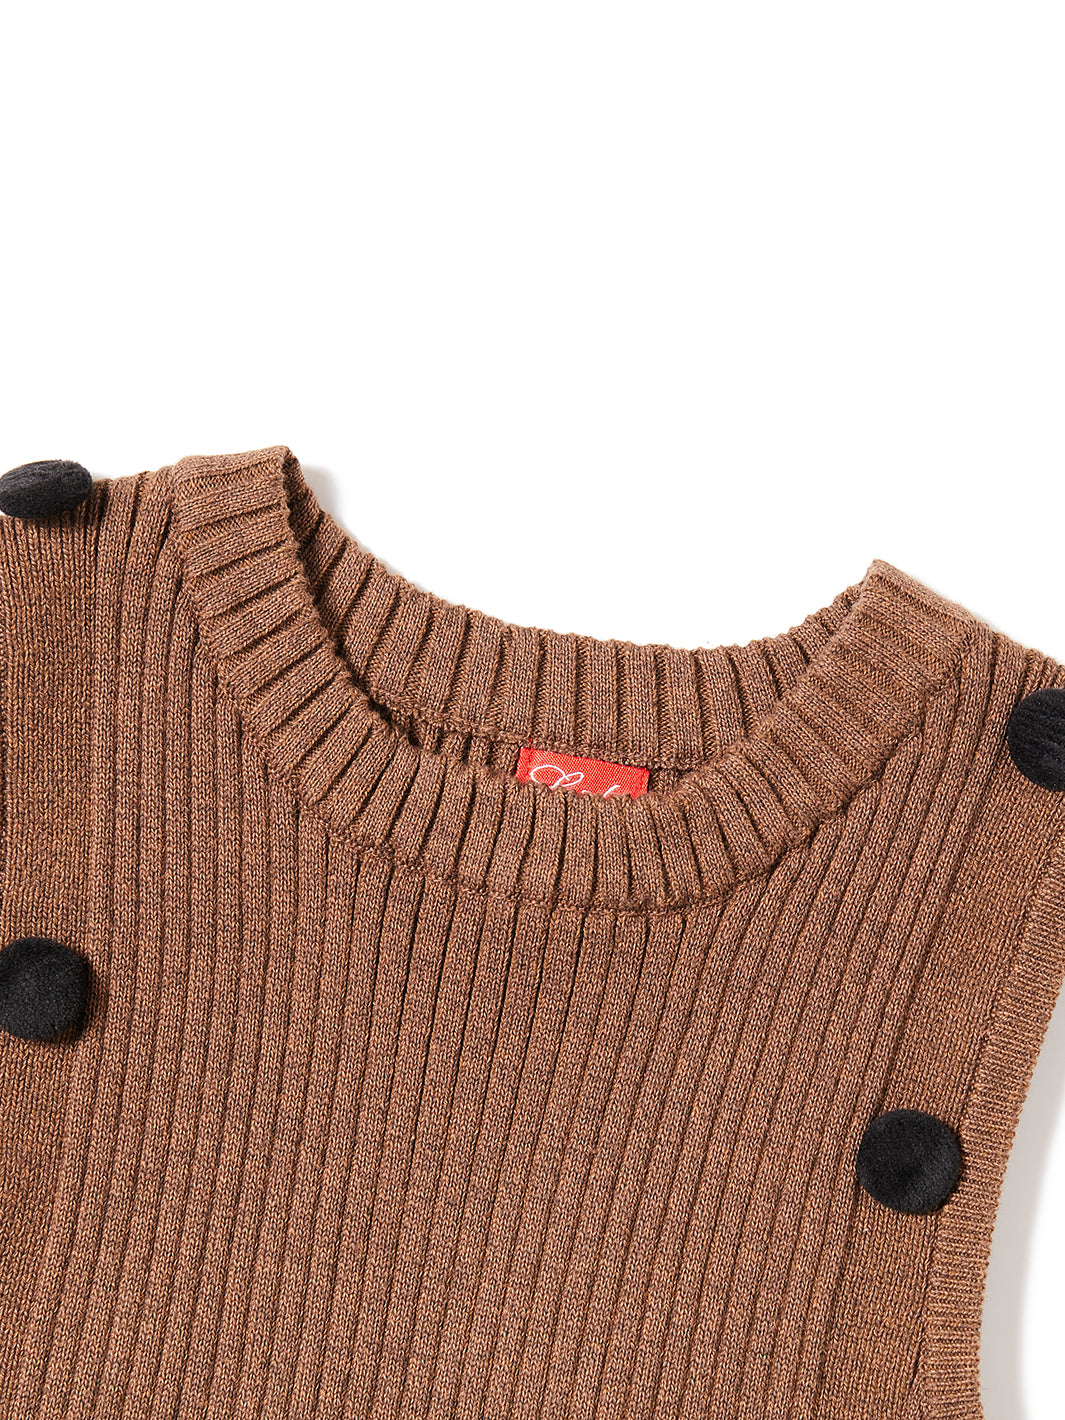 Strap With Buttons Vest - Camel